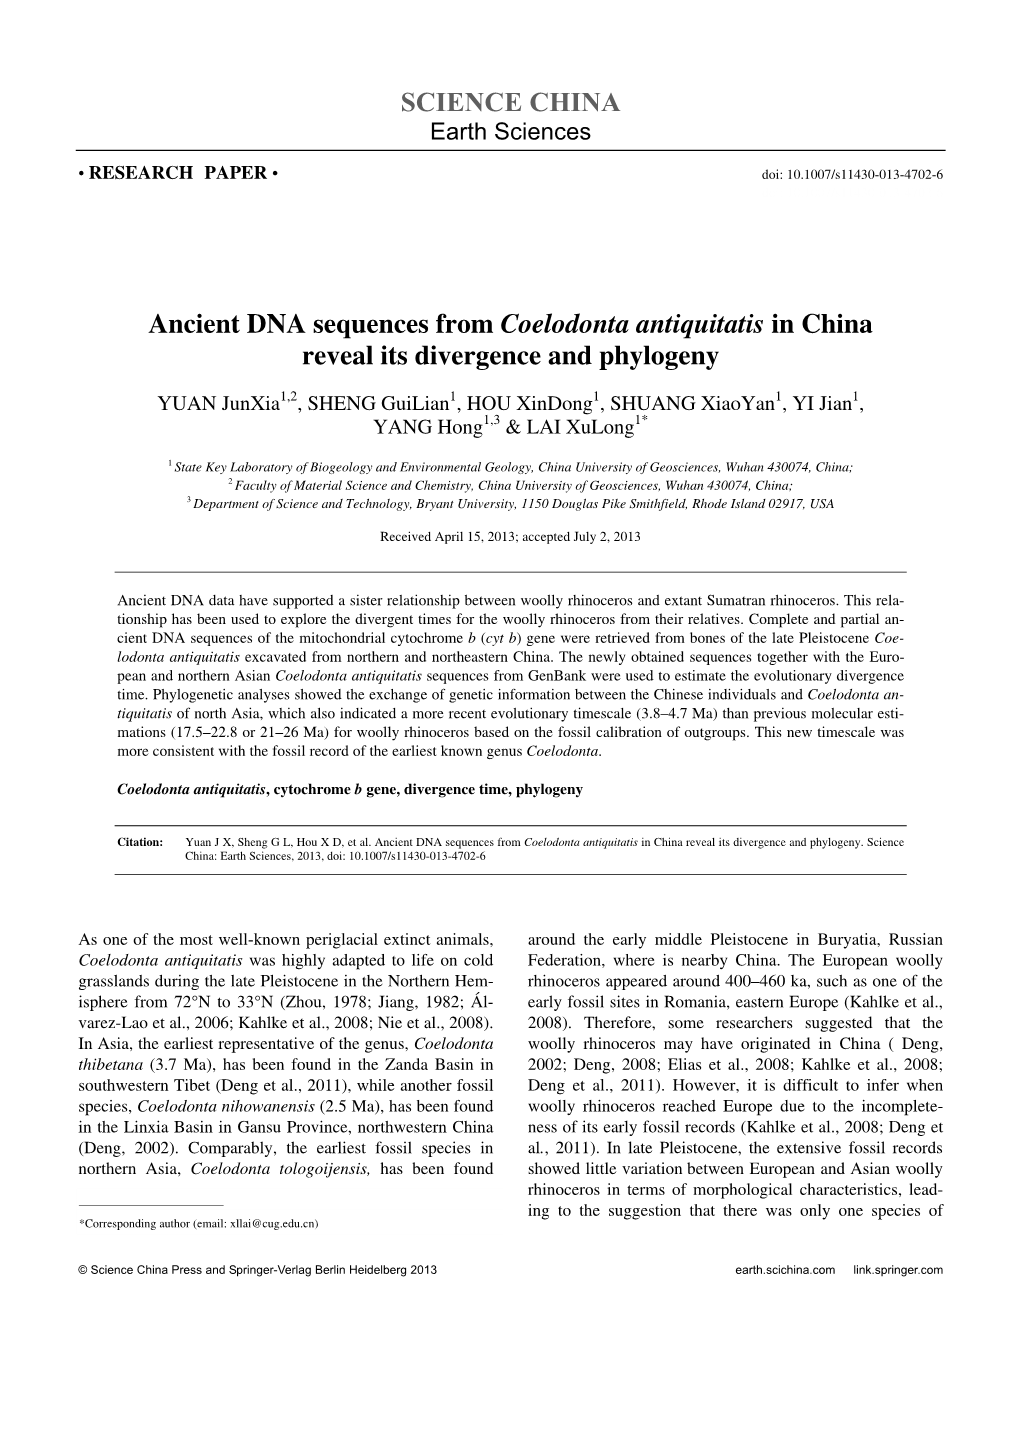 SCIENCE CHINA Ancient DNA Sequences from Coelodonta